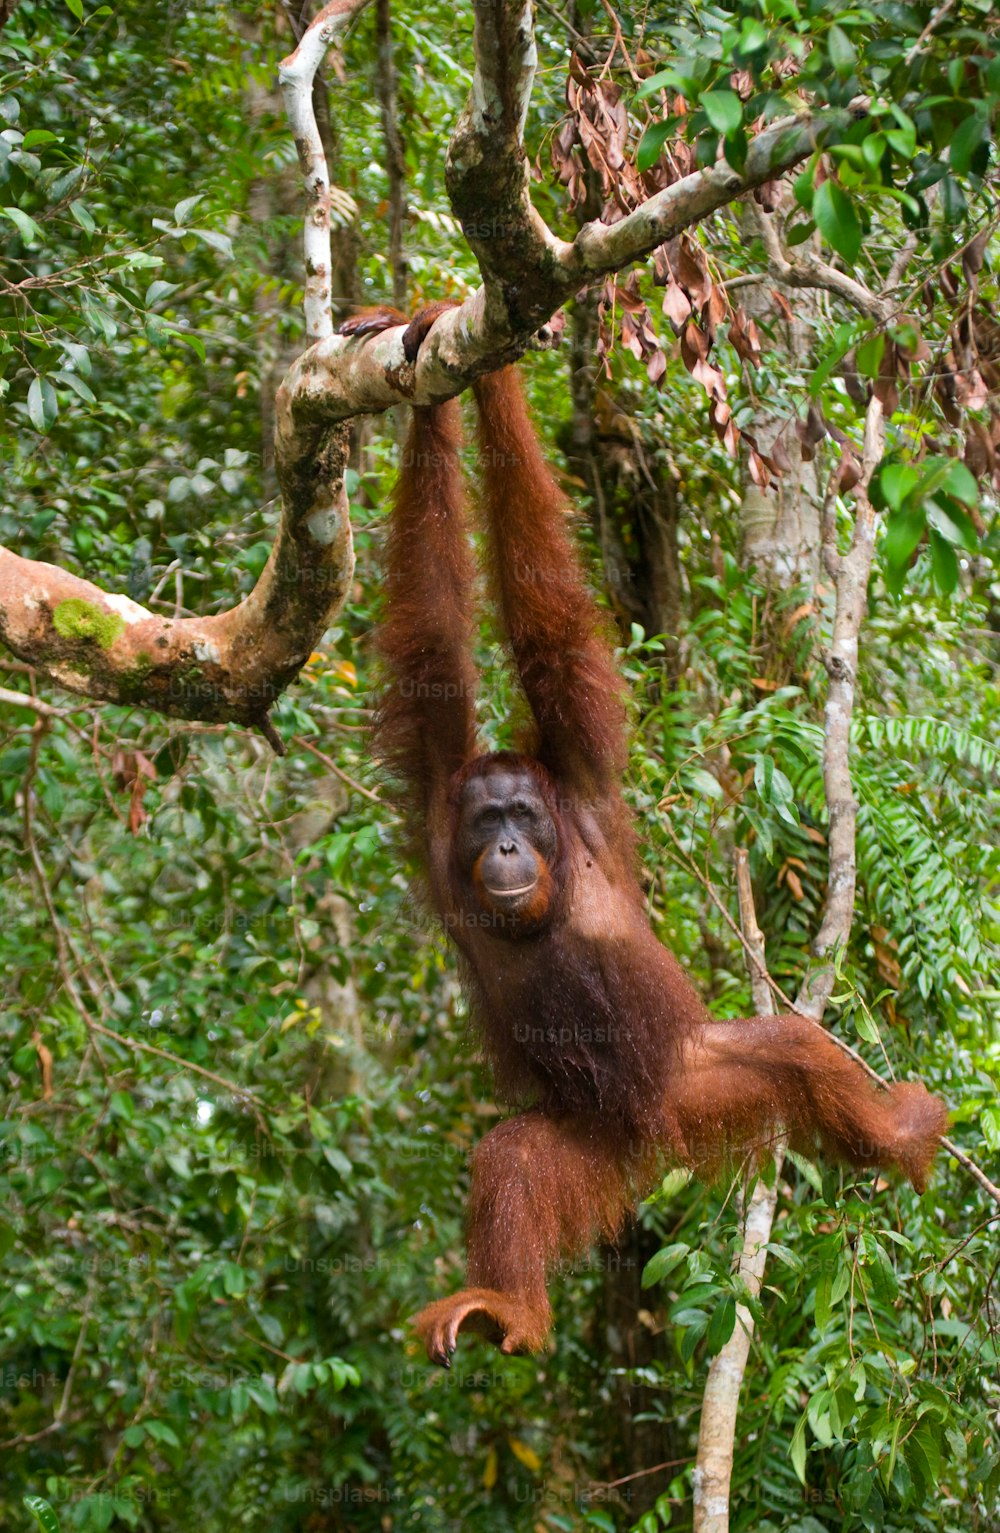 Big male orangutan on a tree in the wild. Indonesia. The island of Kalimantan (Borneo). An excellent illustration.